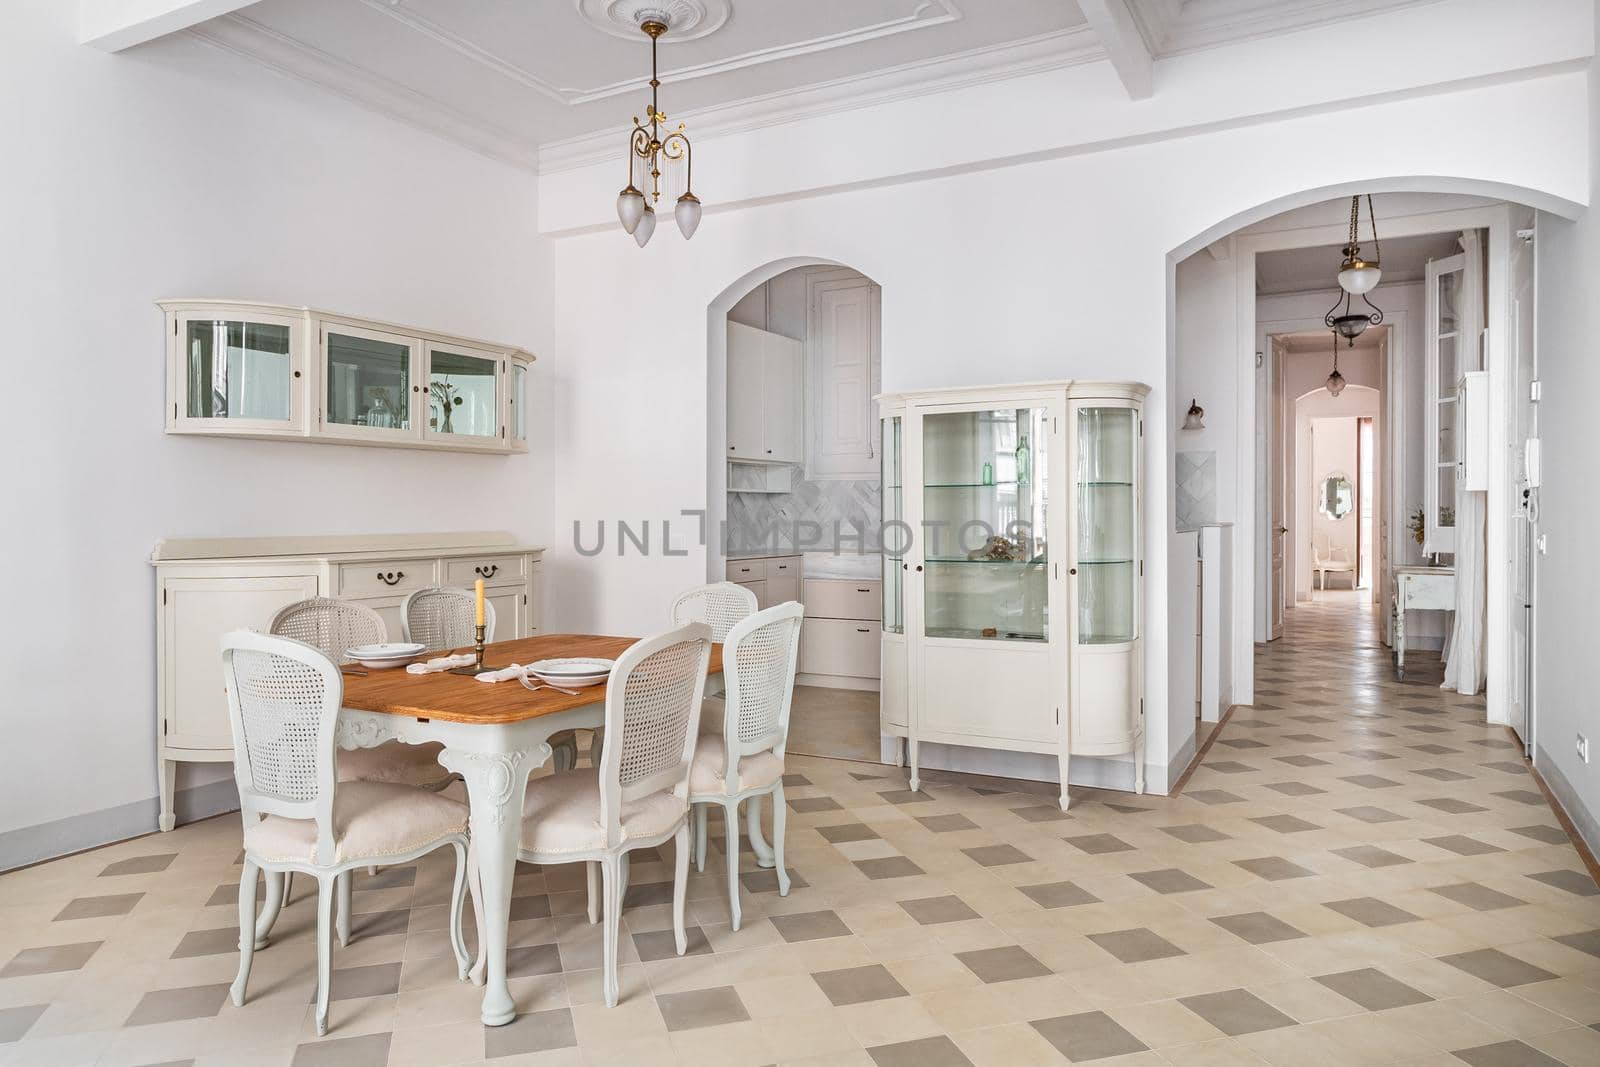 Classic room with dining table, served for two persons, tile floor, light walls and vintage elements of decoration. Beautiful bright interior.